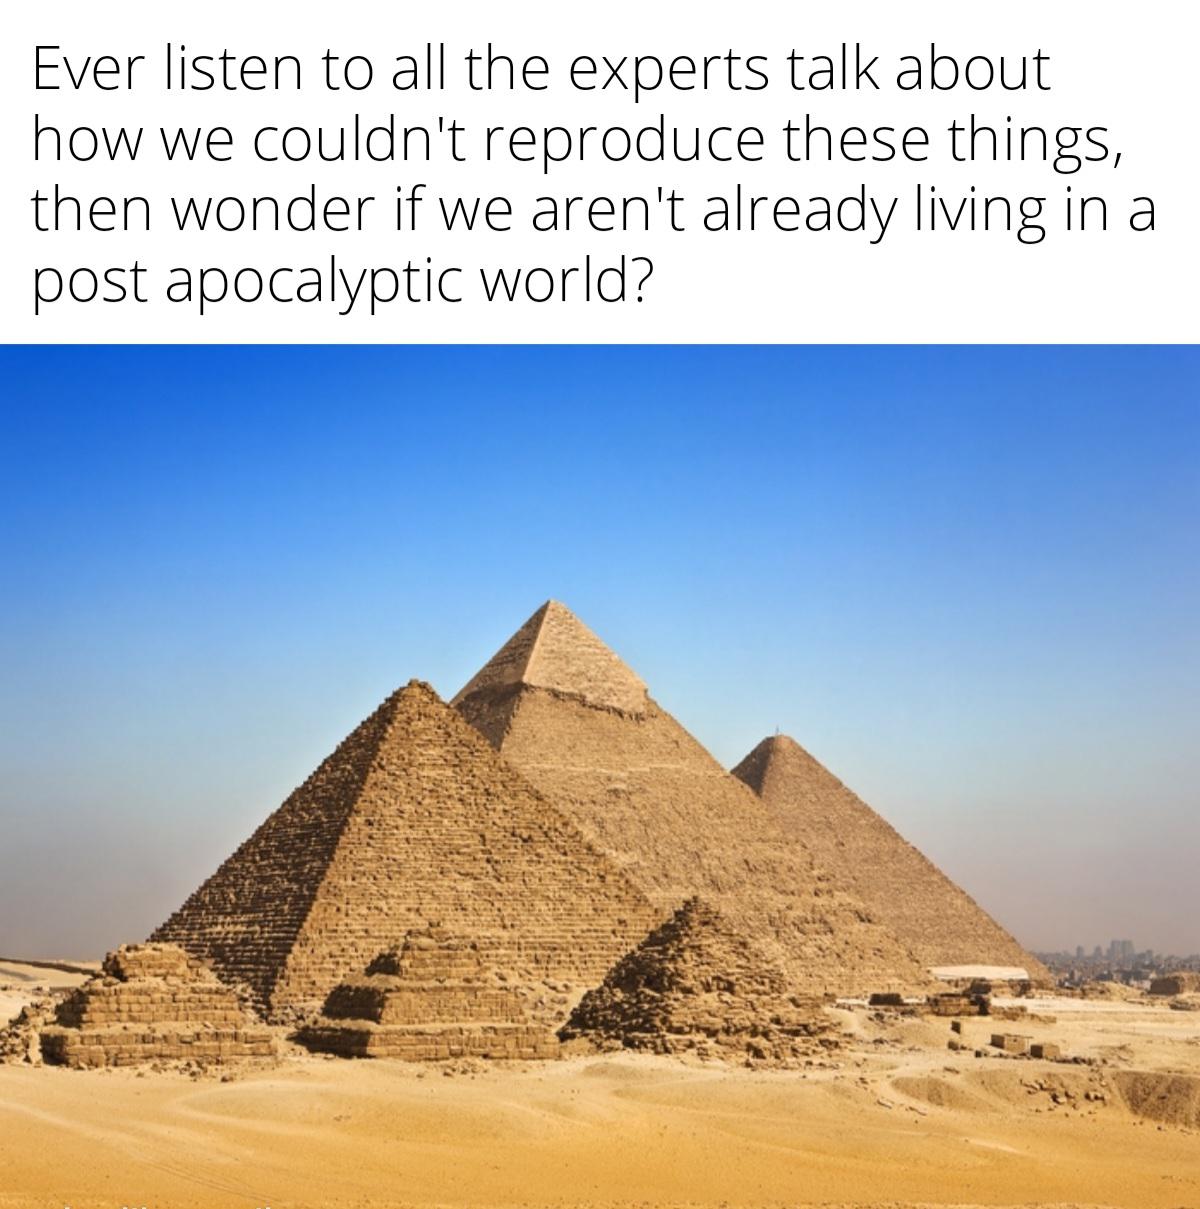 funny memes and pics - pyramid of khafre - Ever listen to all the experts talk about how we couldn't reproduce these things, then wonder if we aren't already living in a post apocalyptic world?